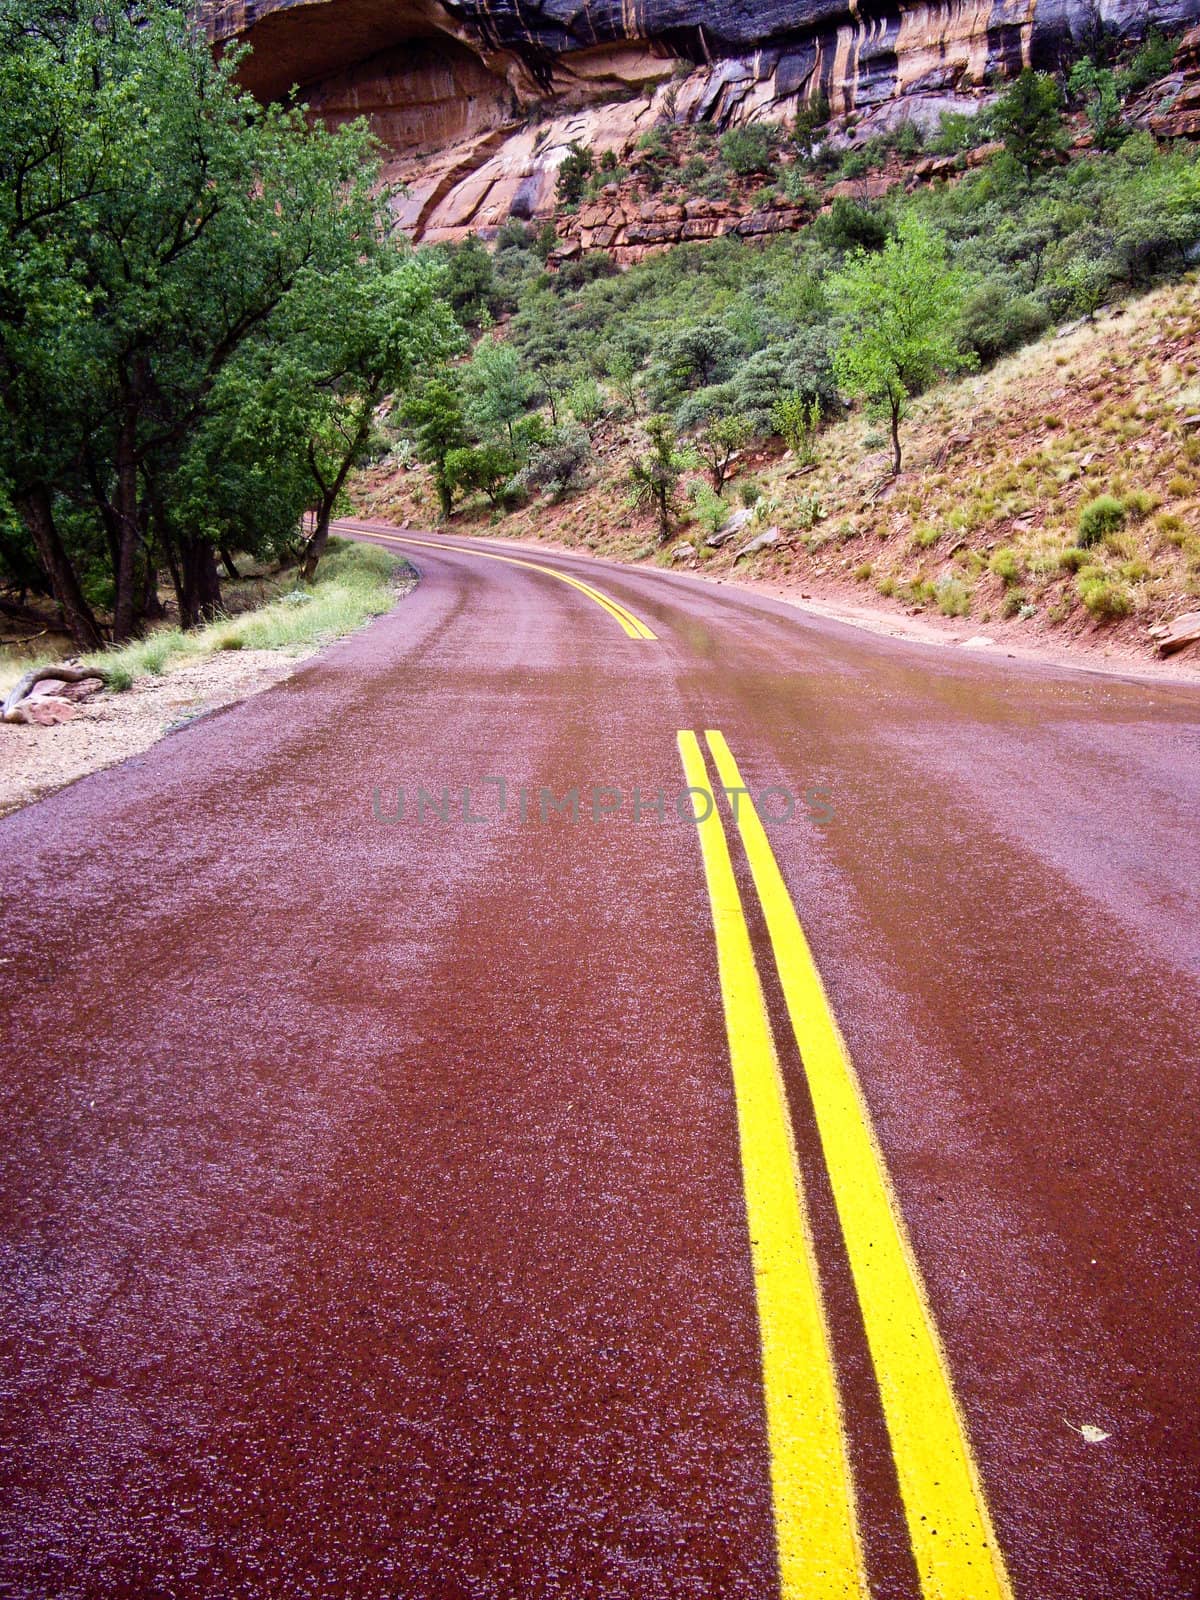 Red Road through Zion Canyon by emattil